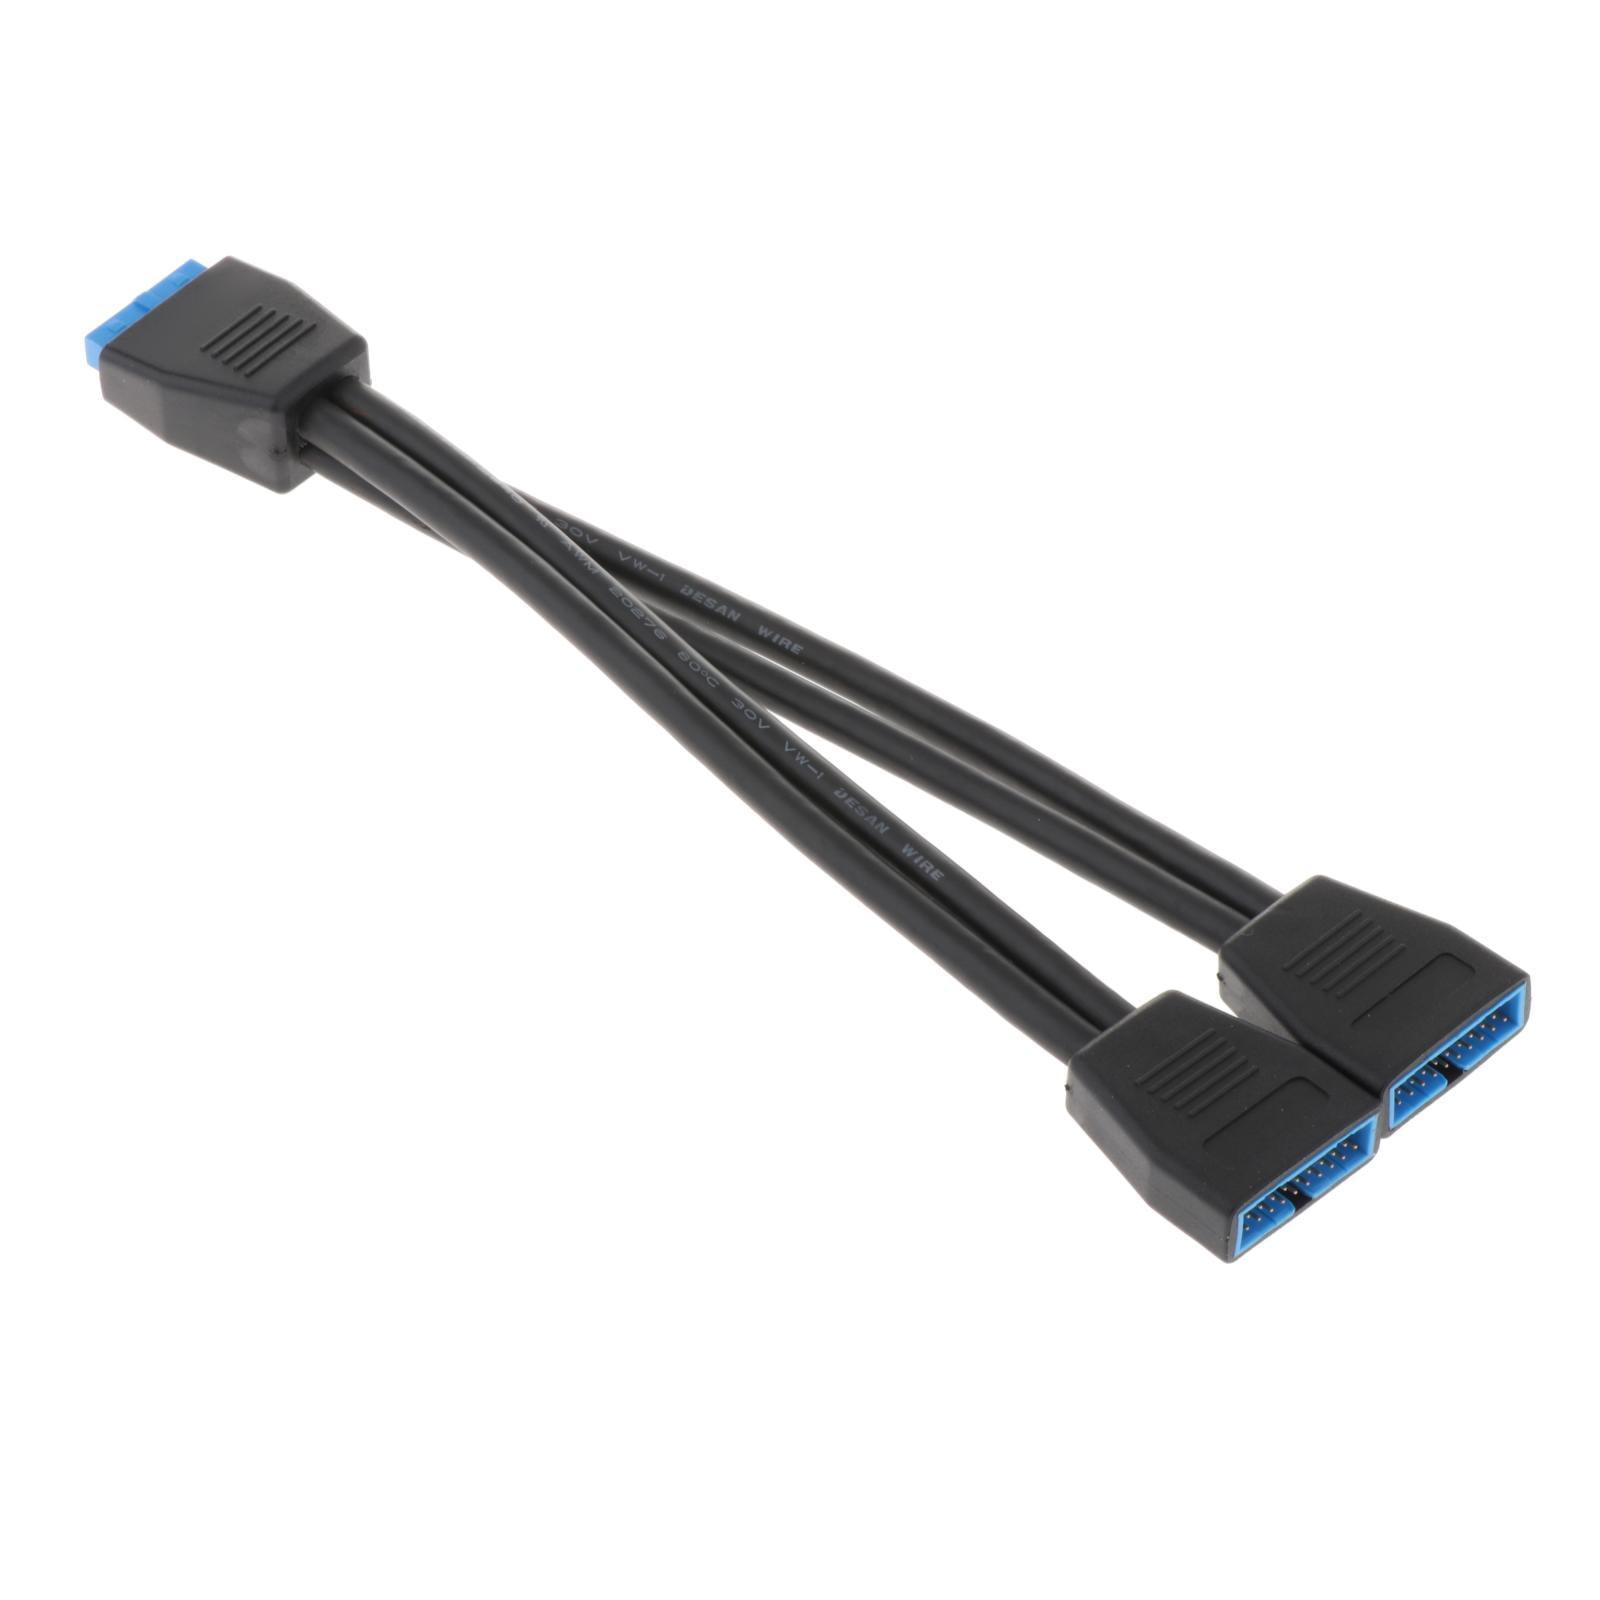 værtinde metal Rafflesia Arnoldi Motherboard USB3.0 Header Fan Splitter Cable Male 1 to 2 Female USB Cable  for Motherboard A 200mm - Walmart.com